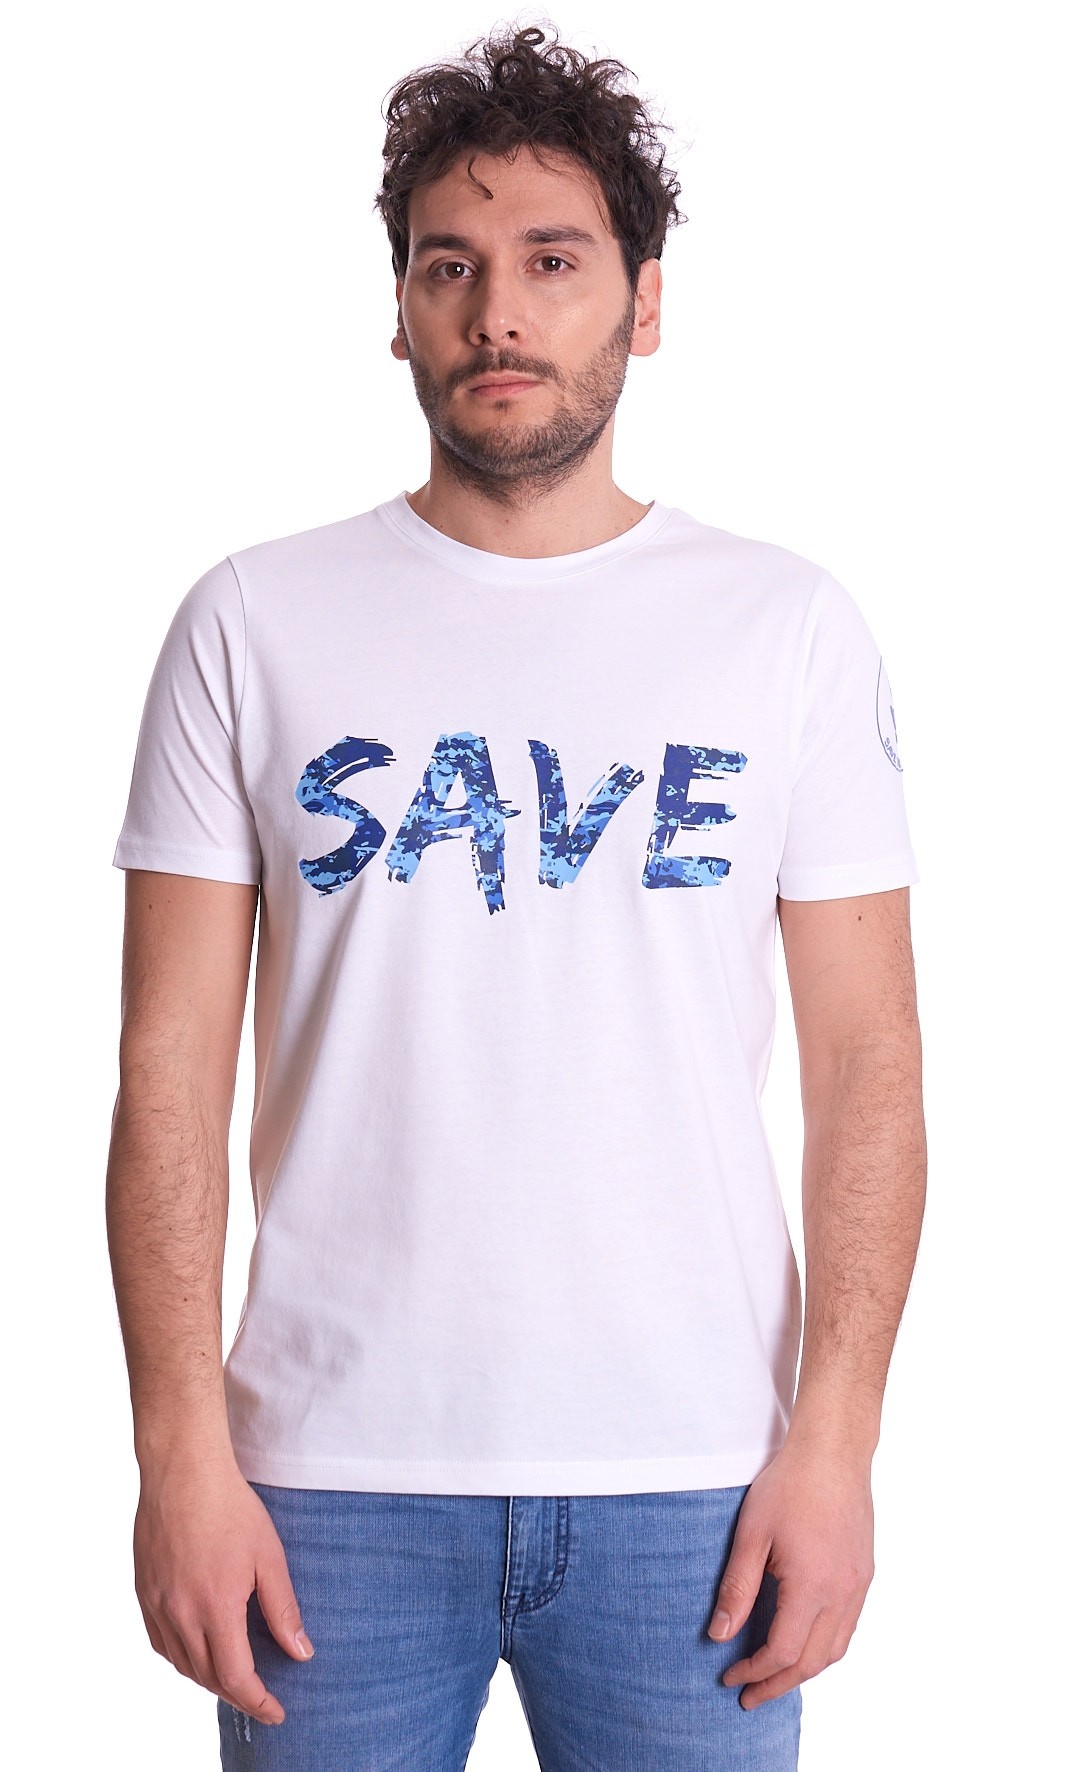 T-SHIRT SAVE THE DUCK SLIM FIT STAMPA CAMOUFLAGE